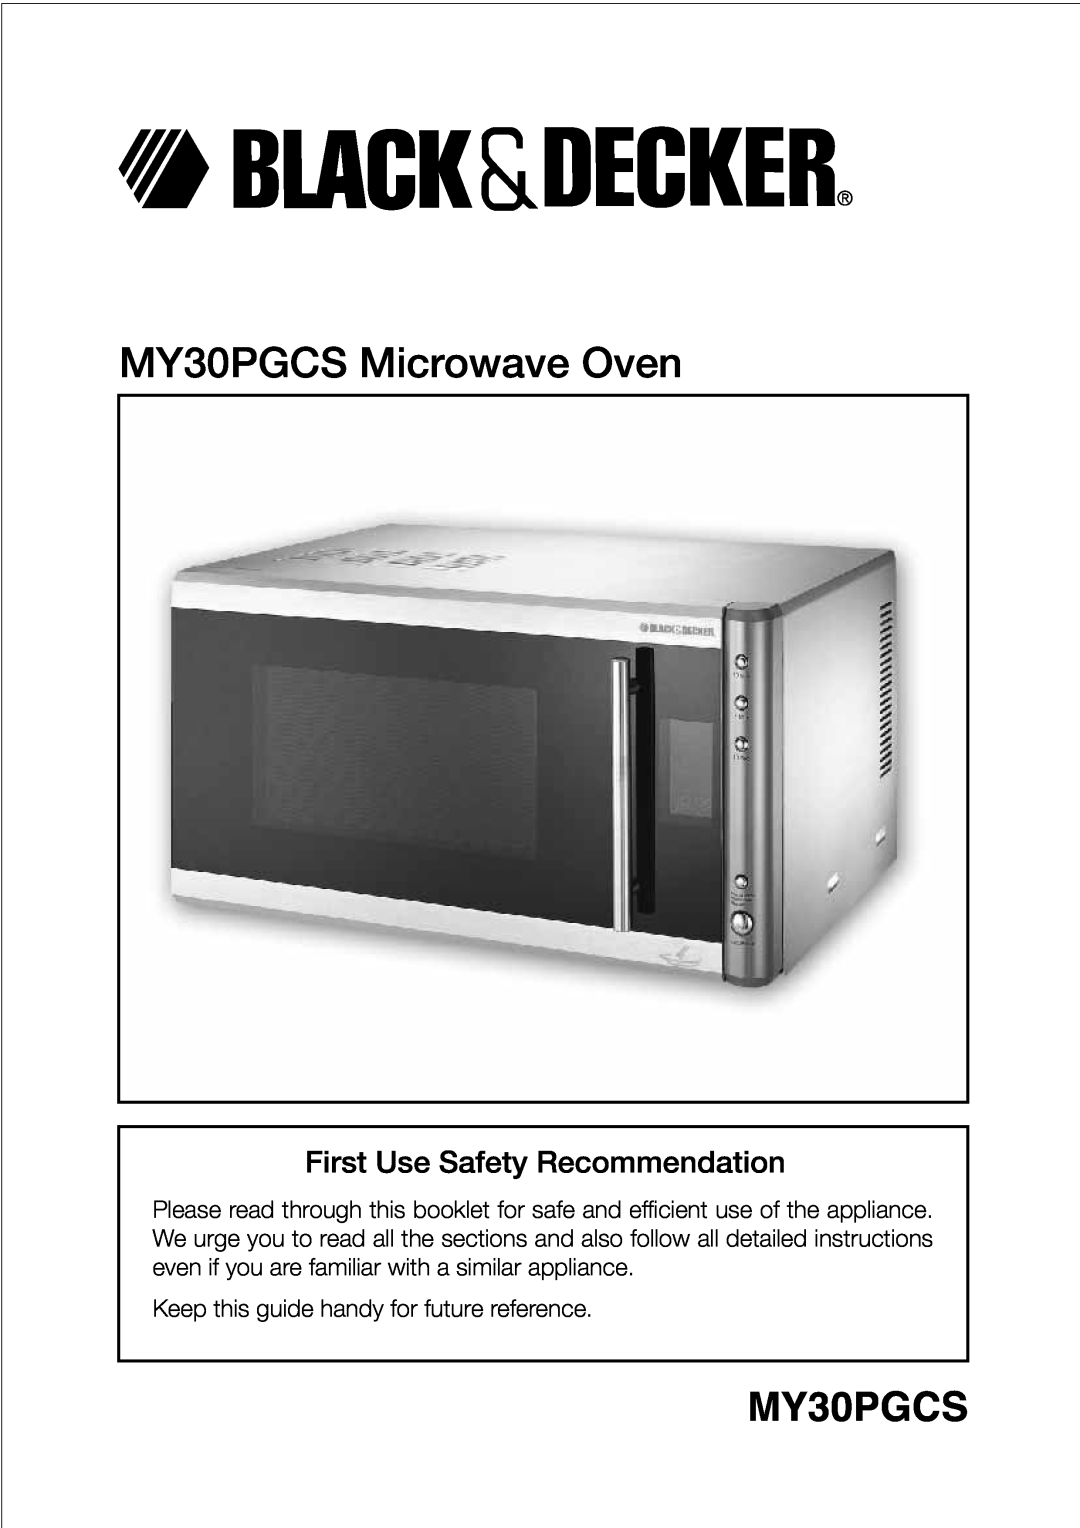 Black & Decker manual MY30PGCS Microwave Oven, First Use Safety Recommendation 